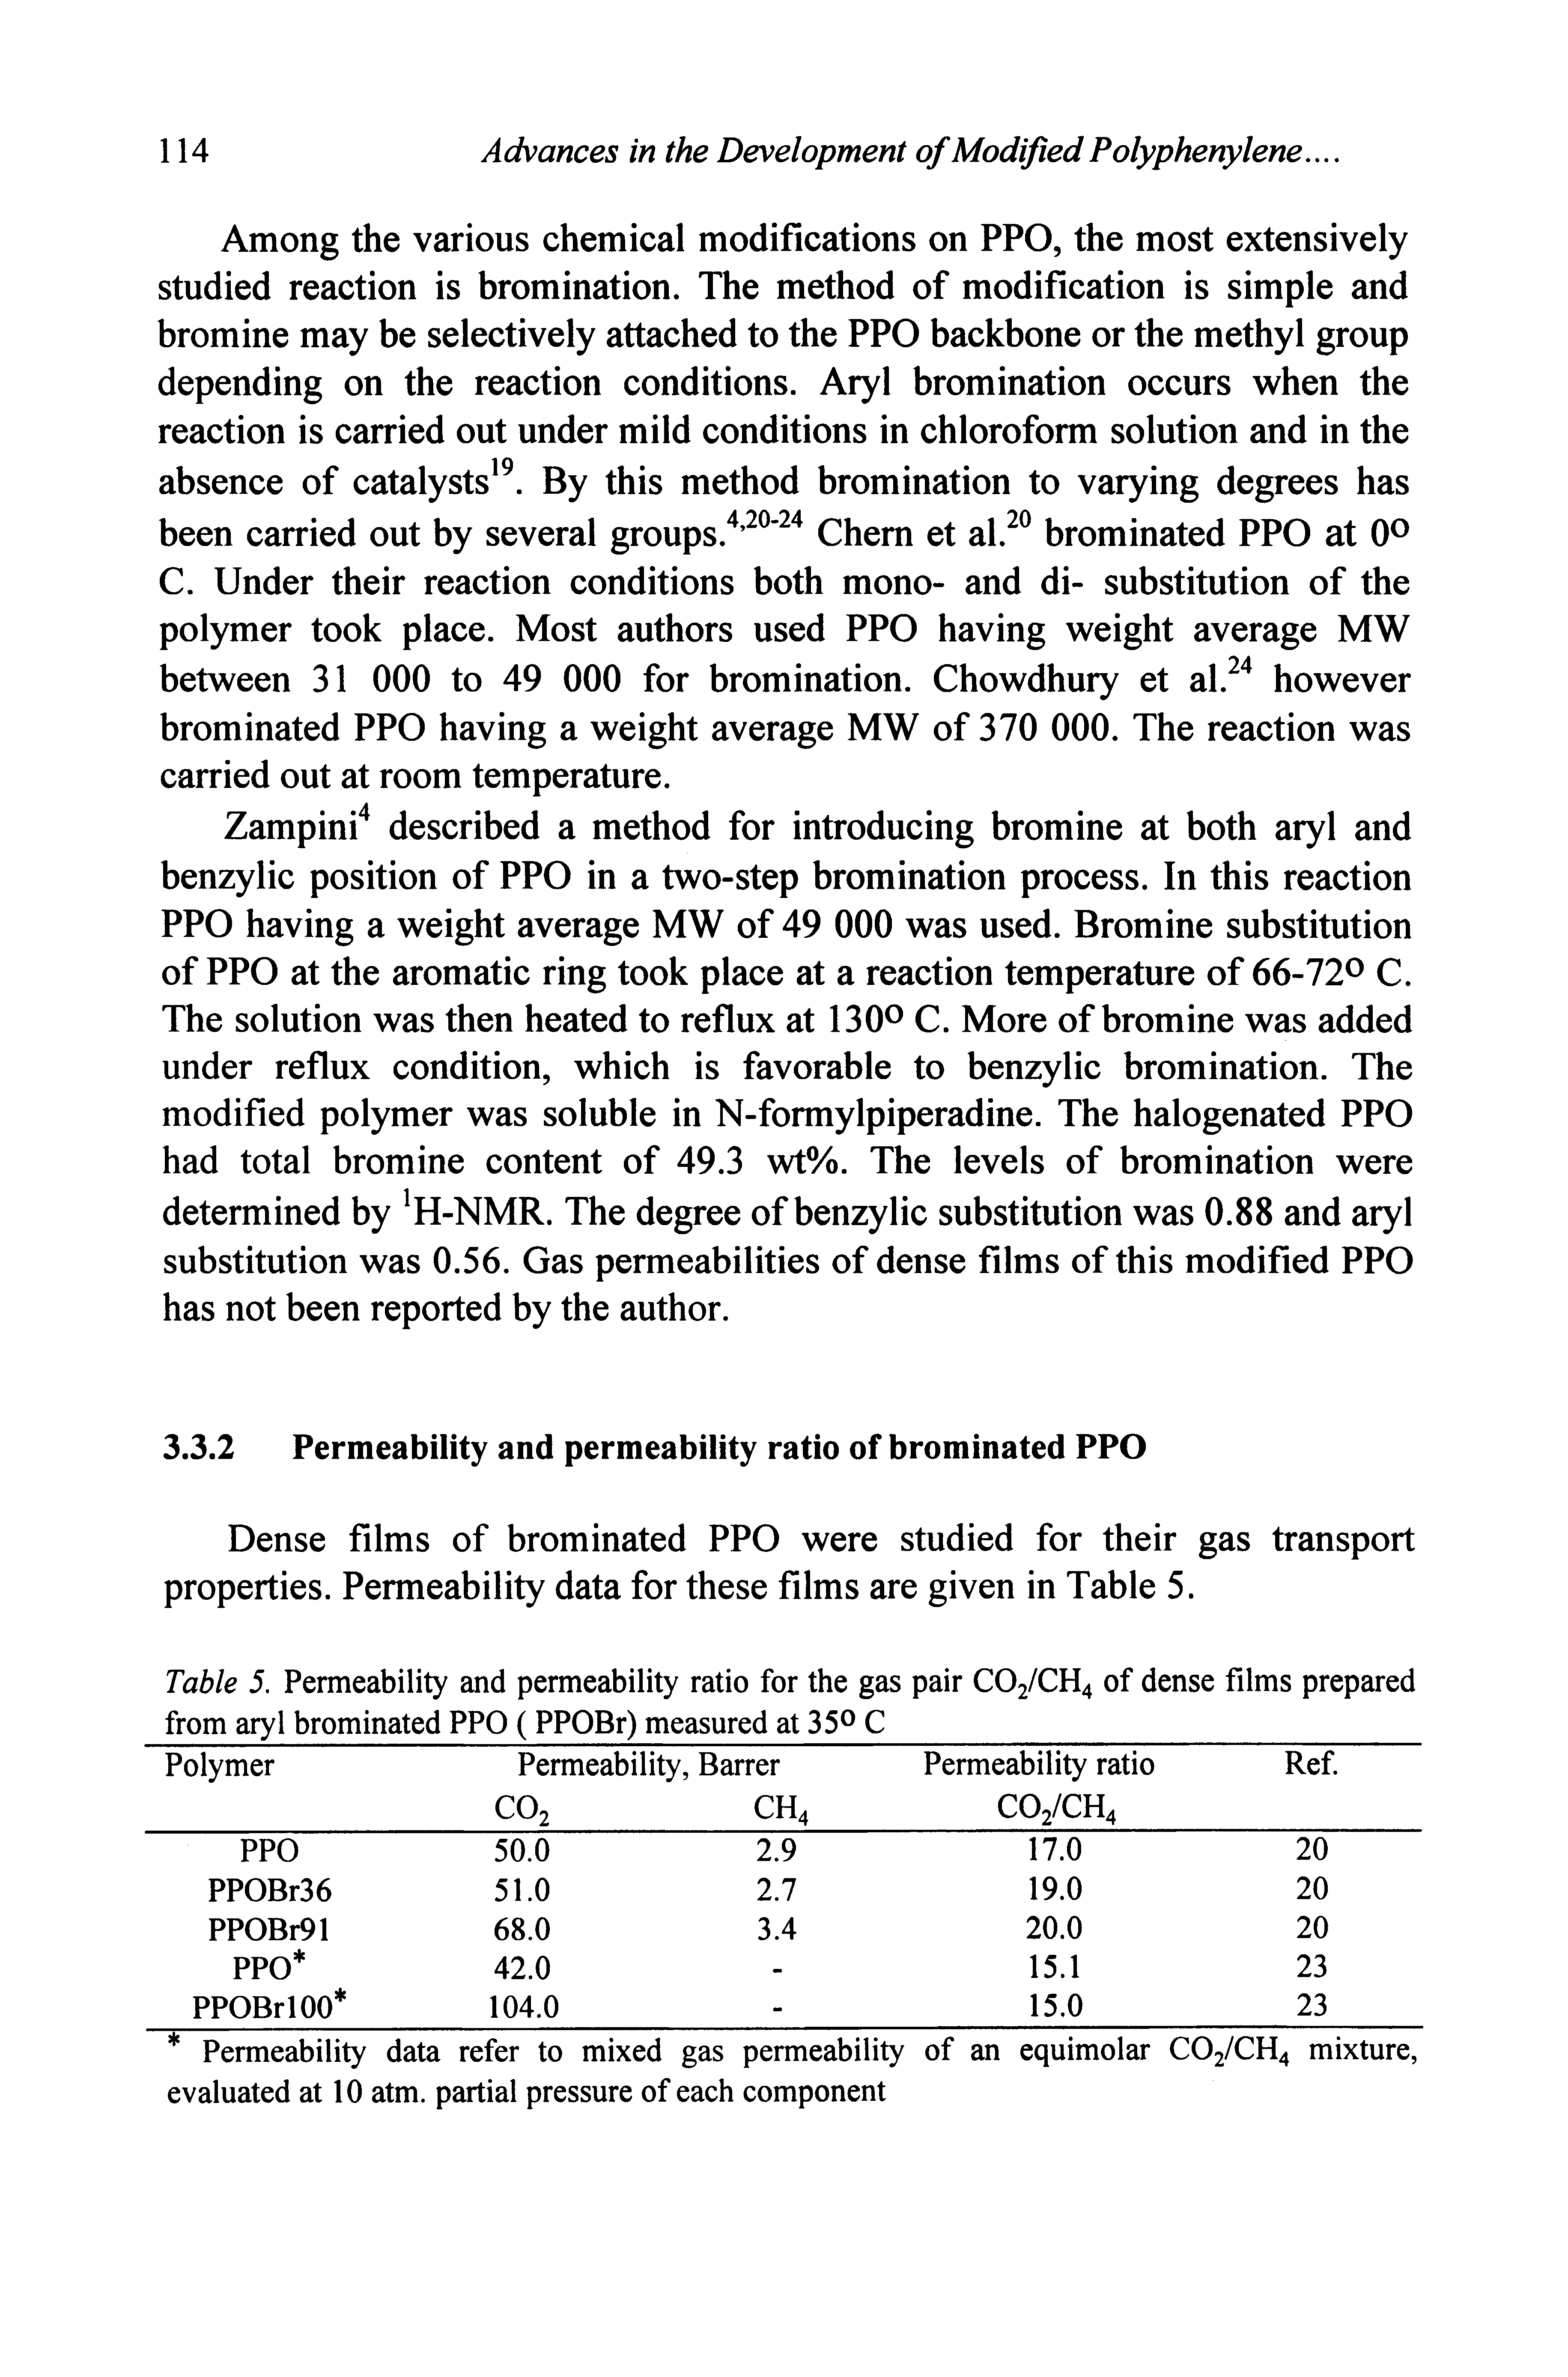 Table 5. Permeability and permeability ratio for the gas pair CO2/CH4 of dense films prepared from aryl brominated PPO (PPOBr) measured at 35 C...